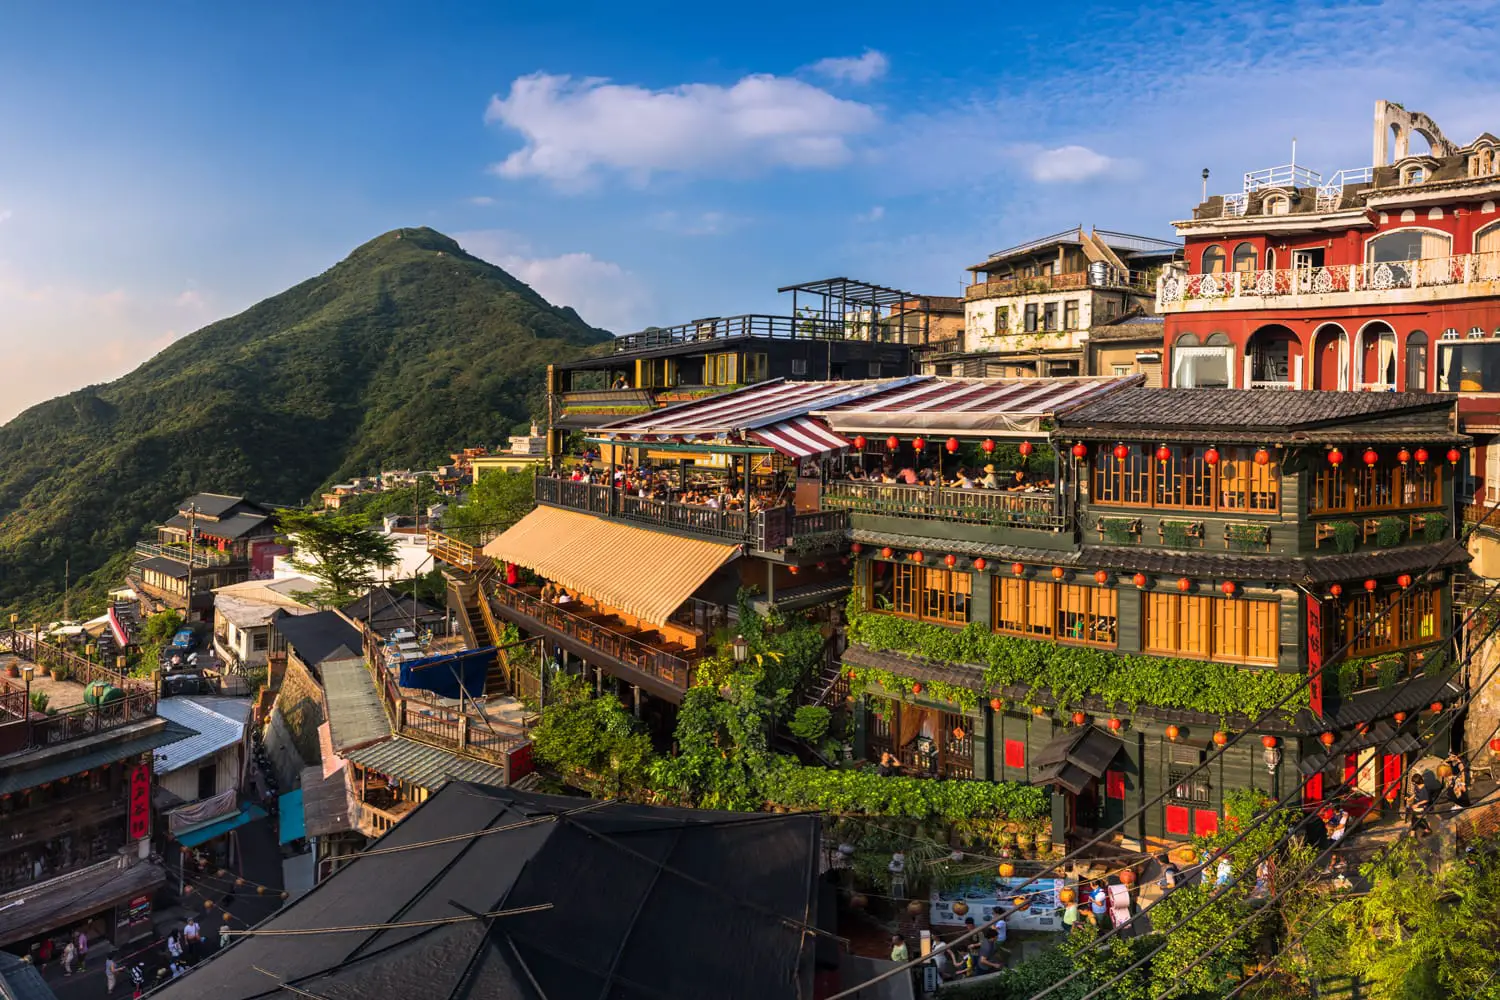 The colourful panorama view of Jiufen old city at evening, Jiufen, Taiwan